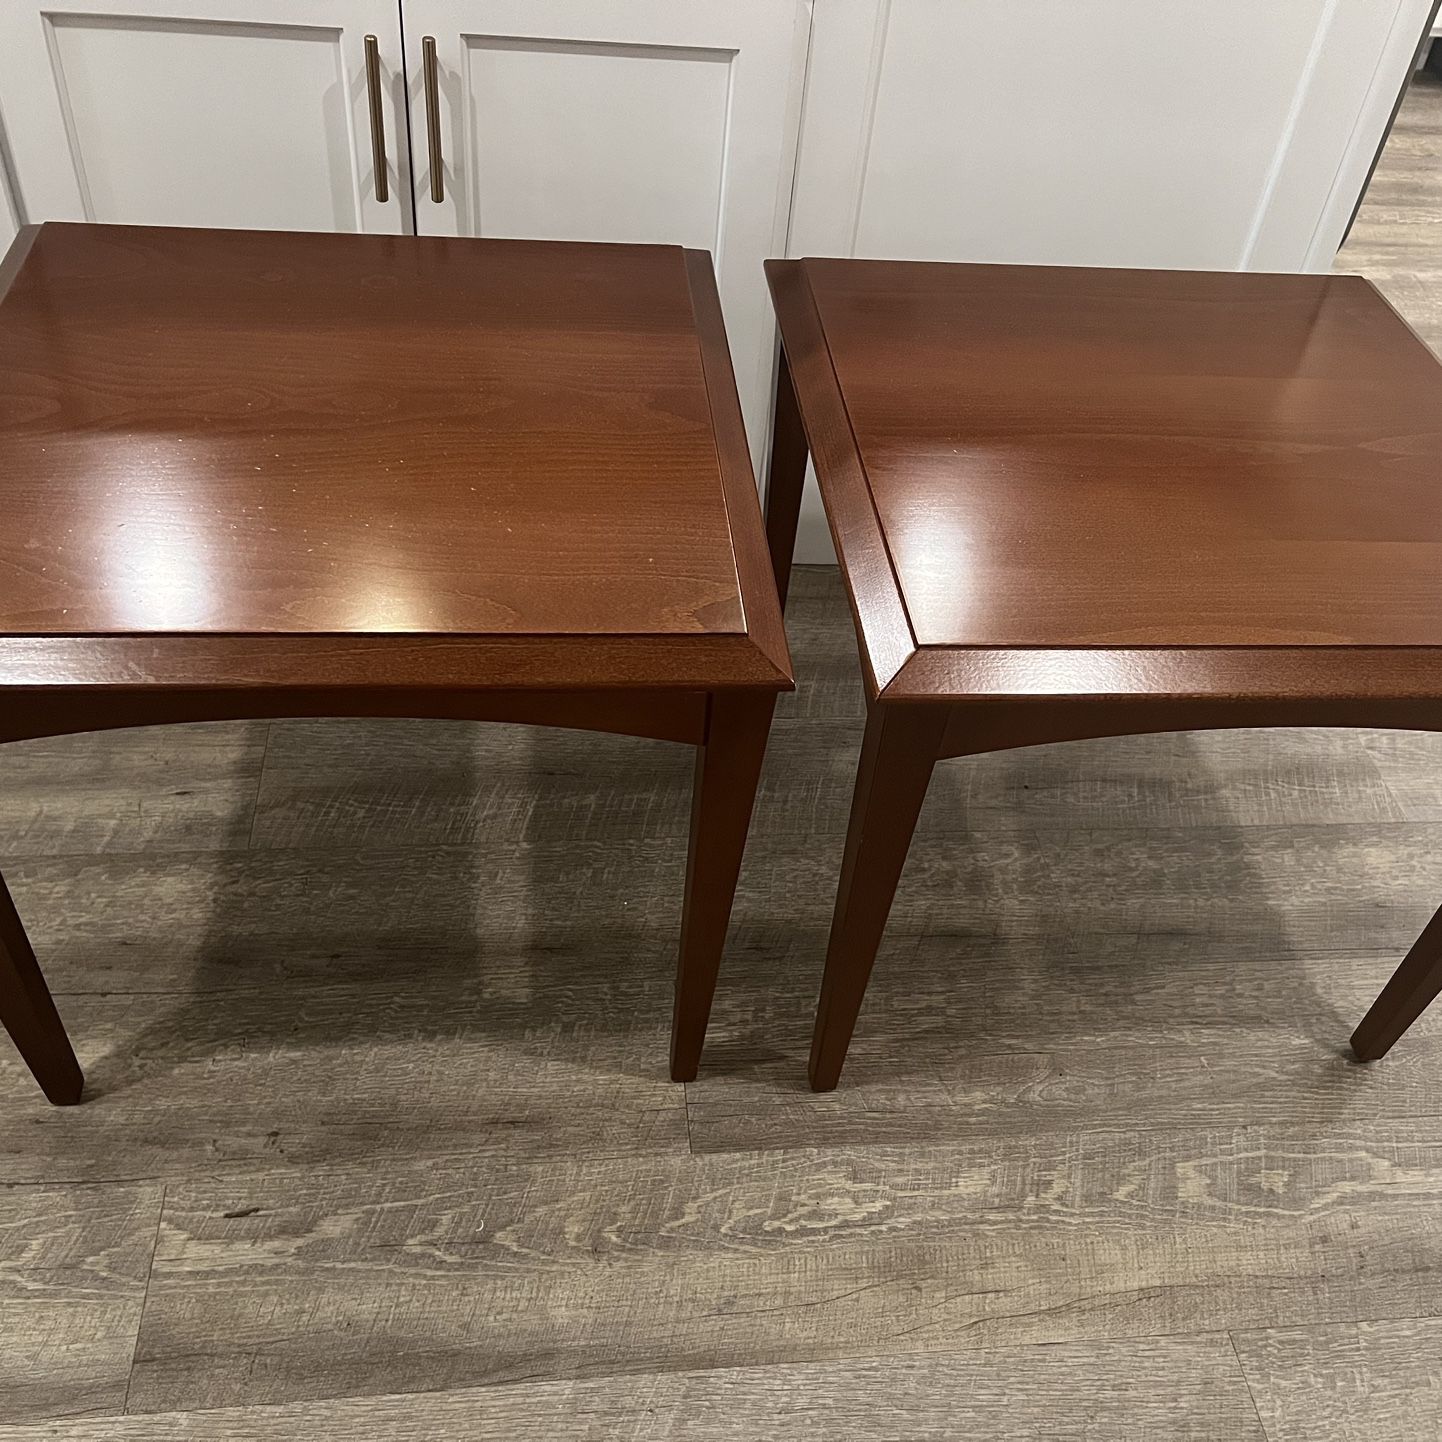 2 Wooden Side Tables 